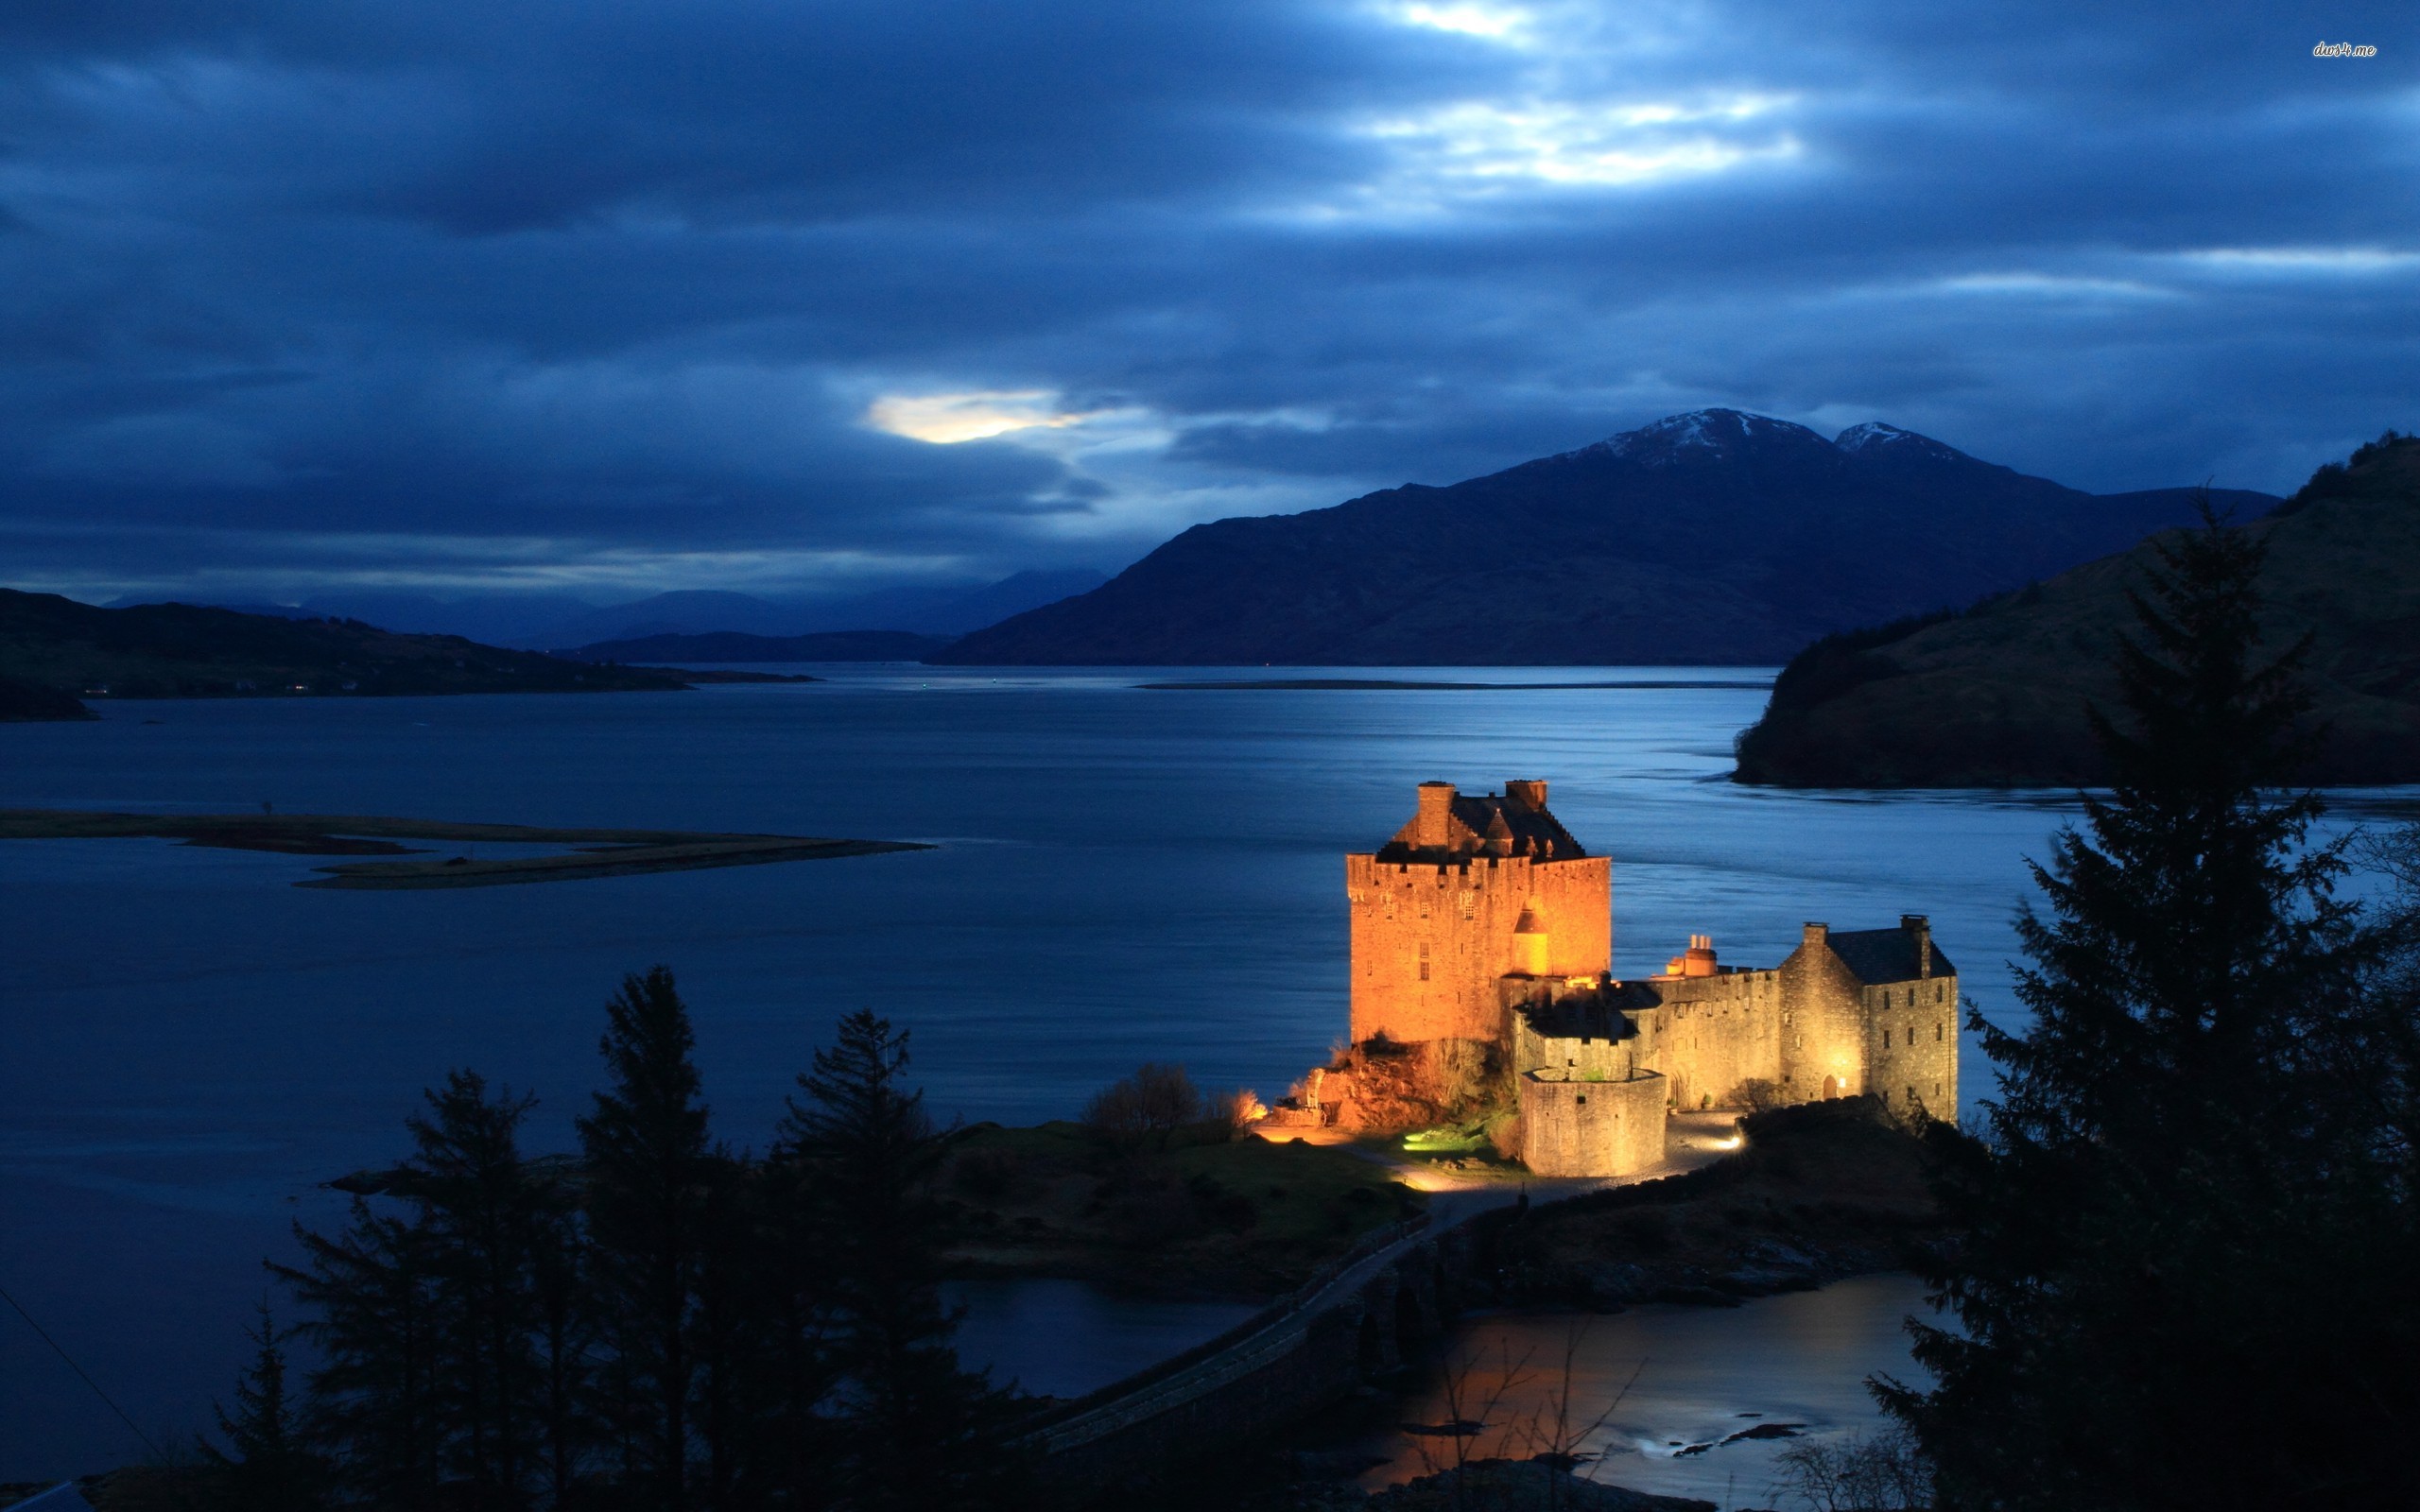 other castles fortresses and tower houses drop by Visit Scotland